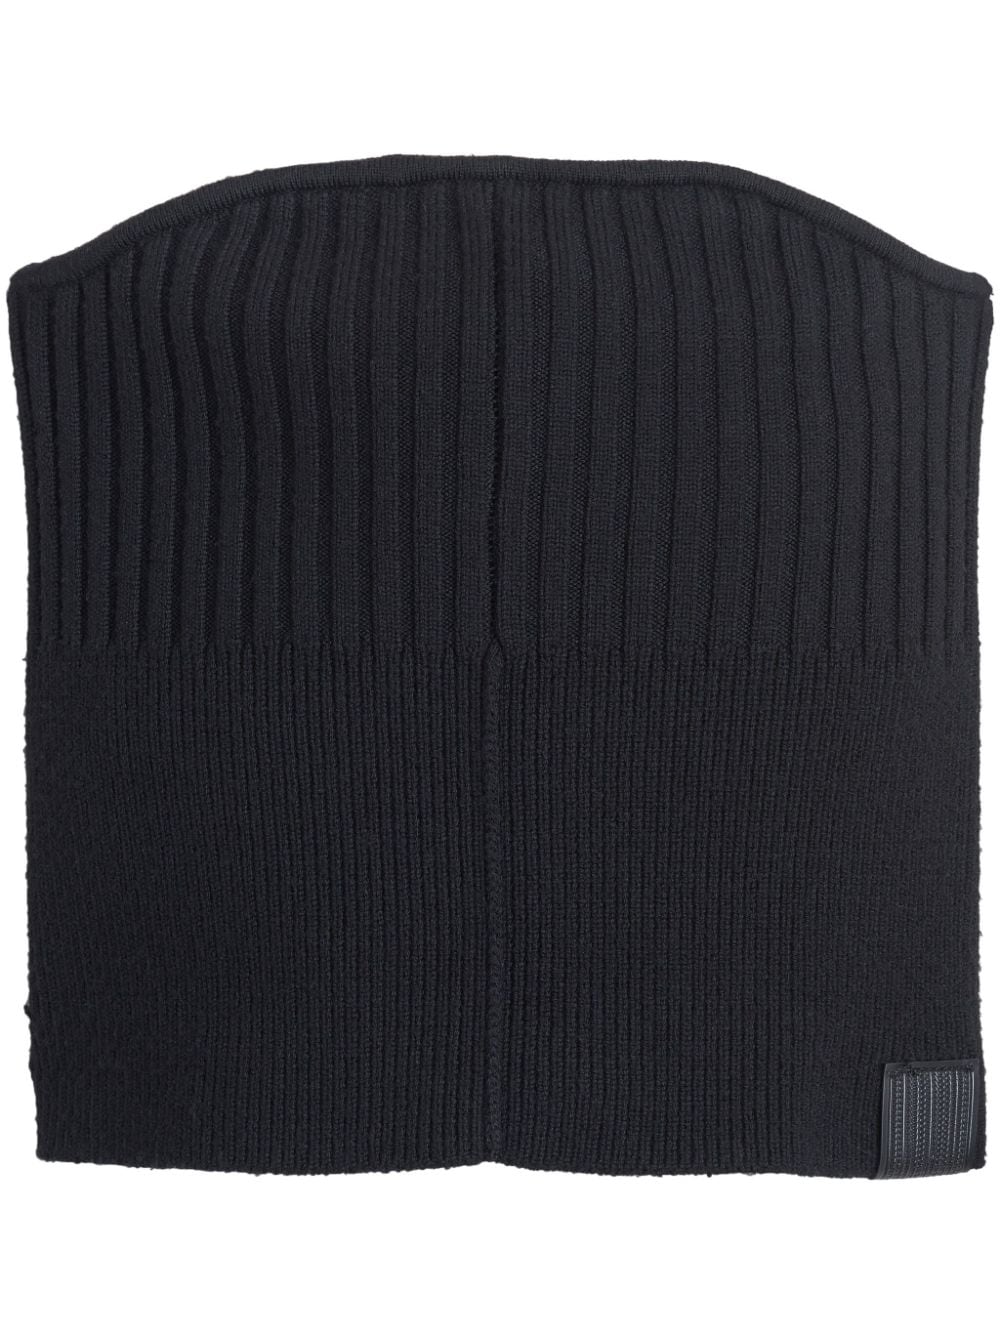 Marc Jacobs Tube ribbed knit top - Black von Marc Jacobs